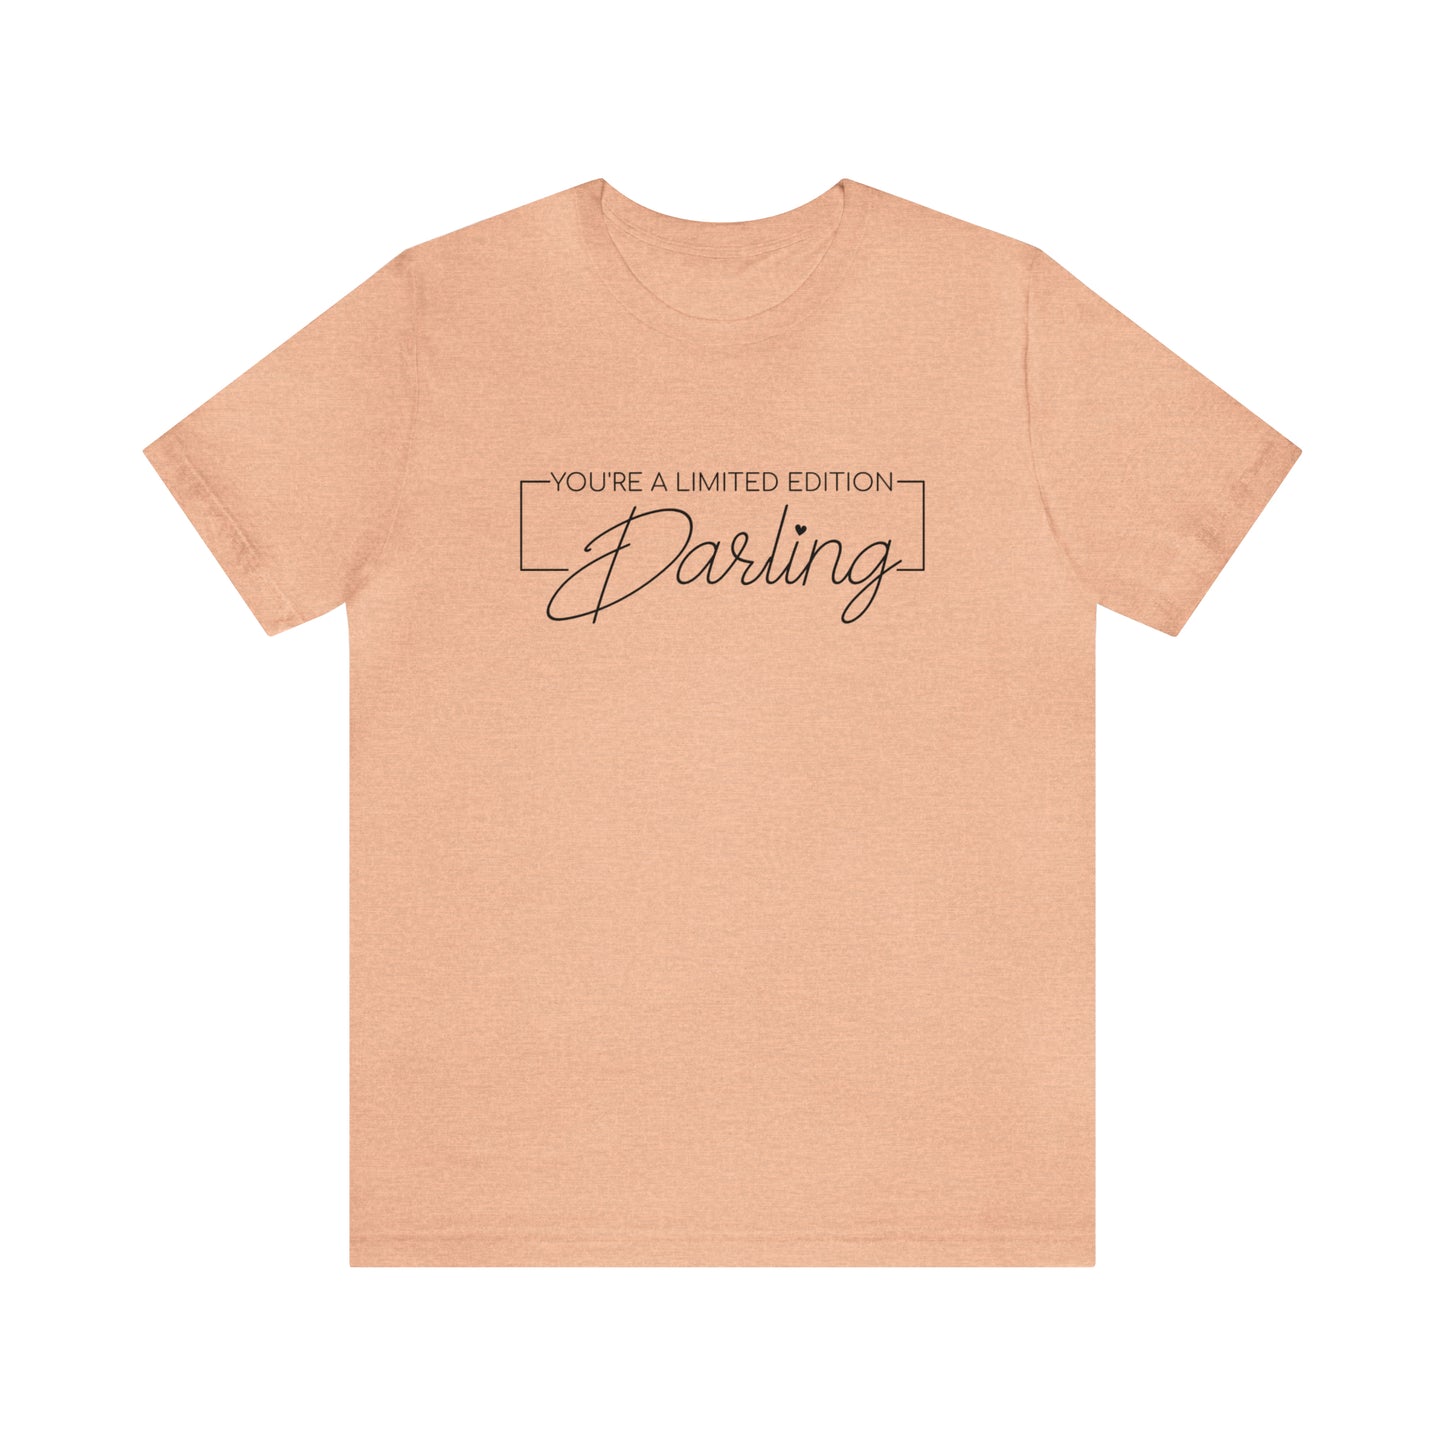 You're a Limited Edition Darling...... Motivational Women's T-Shirt